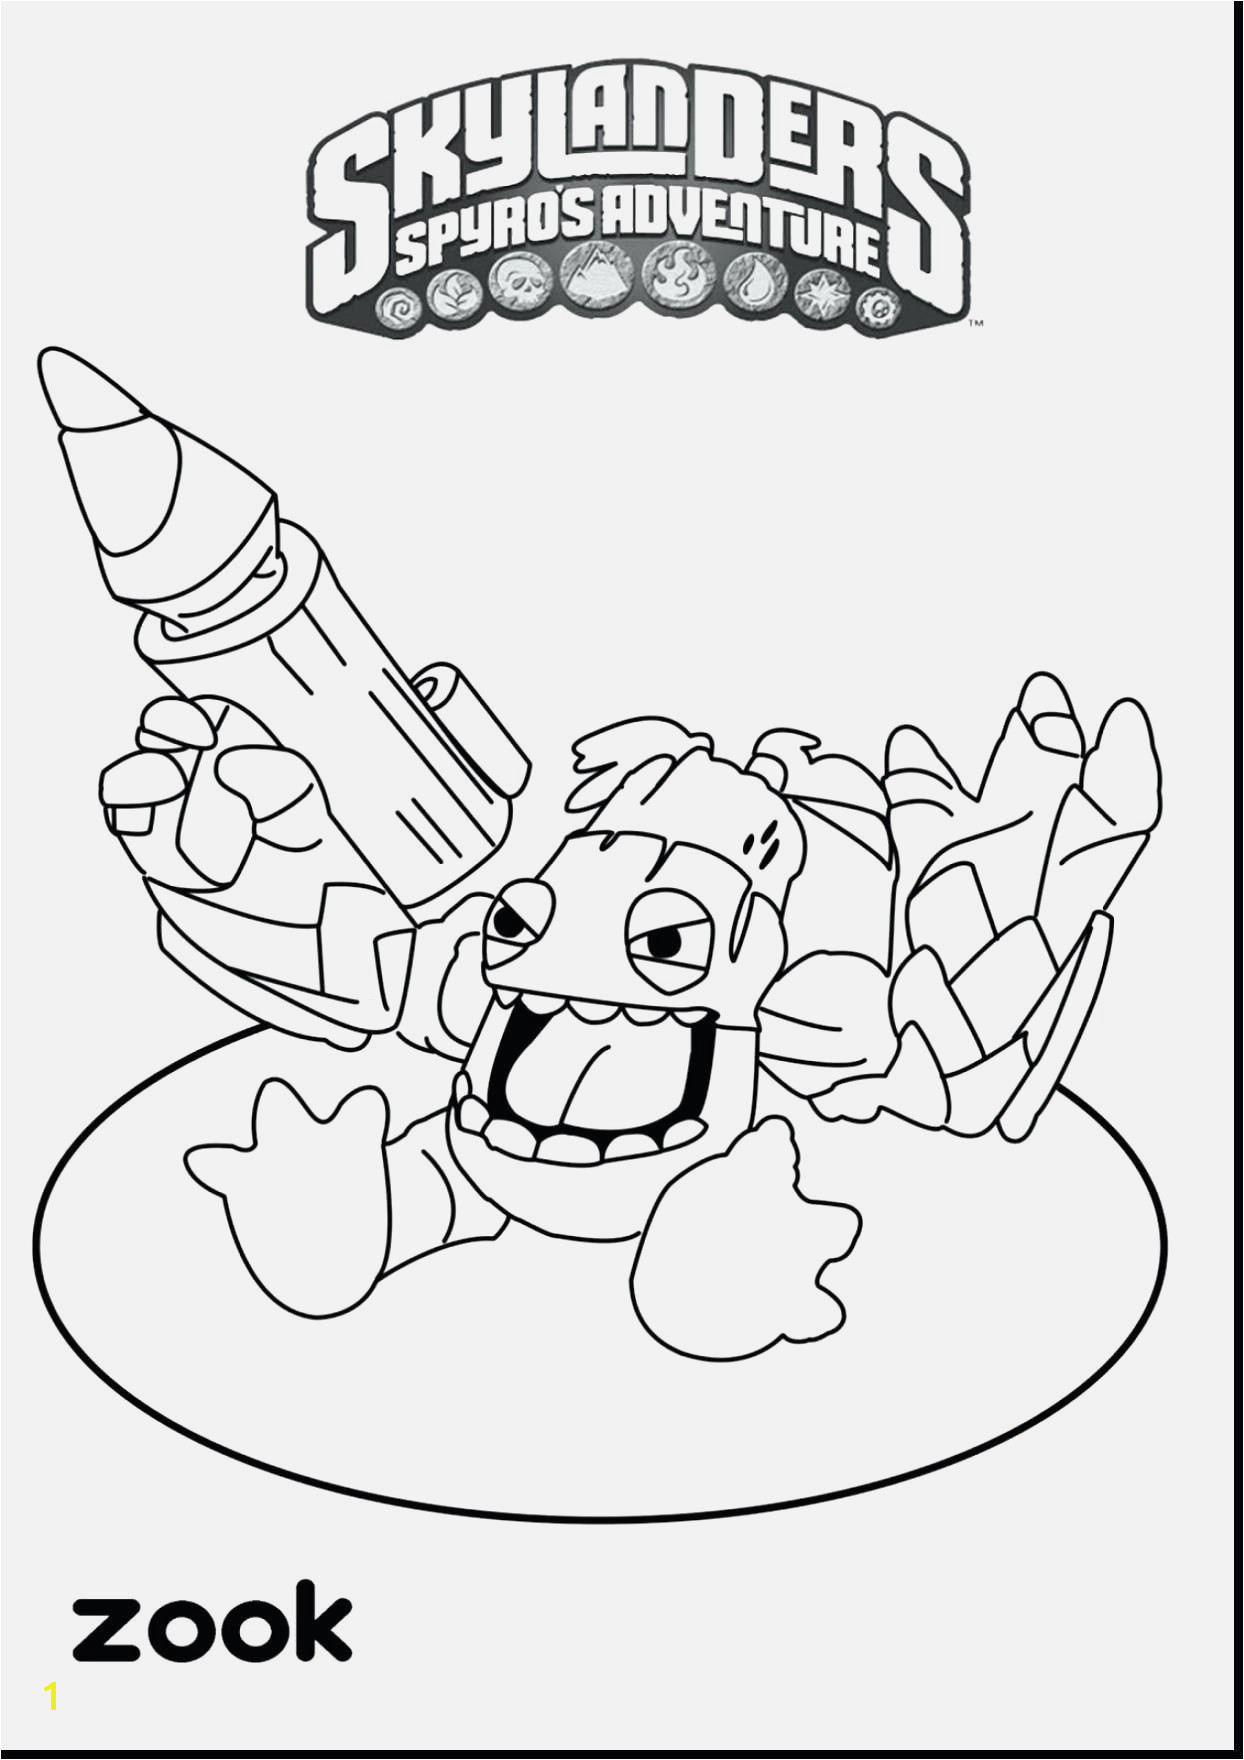 Friendship Coloring Pages Free Print Thank You Coloring Pages Gallery thephotosync Friendship Coloring Pages Elegant